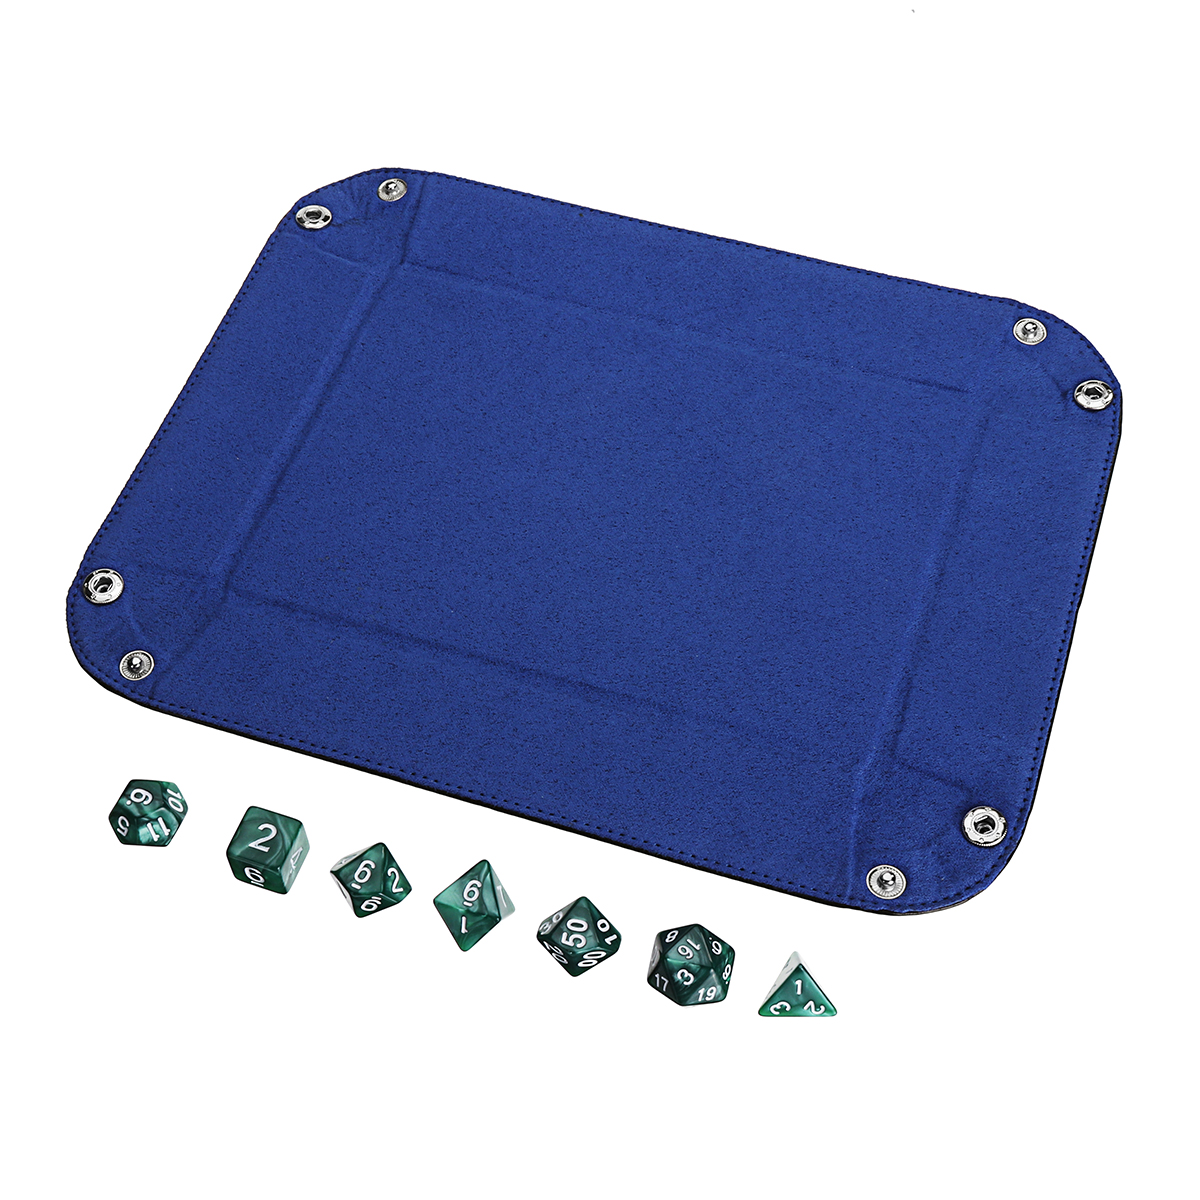 Portable-Fold-Dice-Tray-PU-Leather-with-7-Polyhedral-Dice-for-Tabletop-Dice-Games-1346582-3